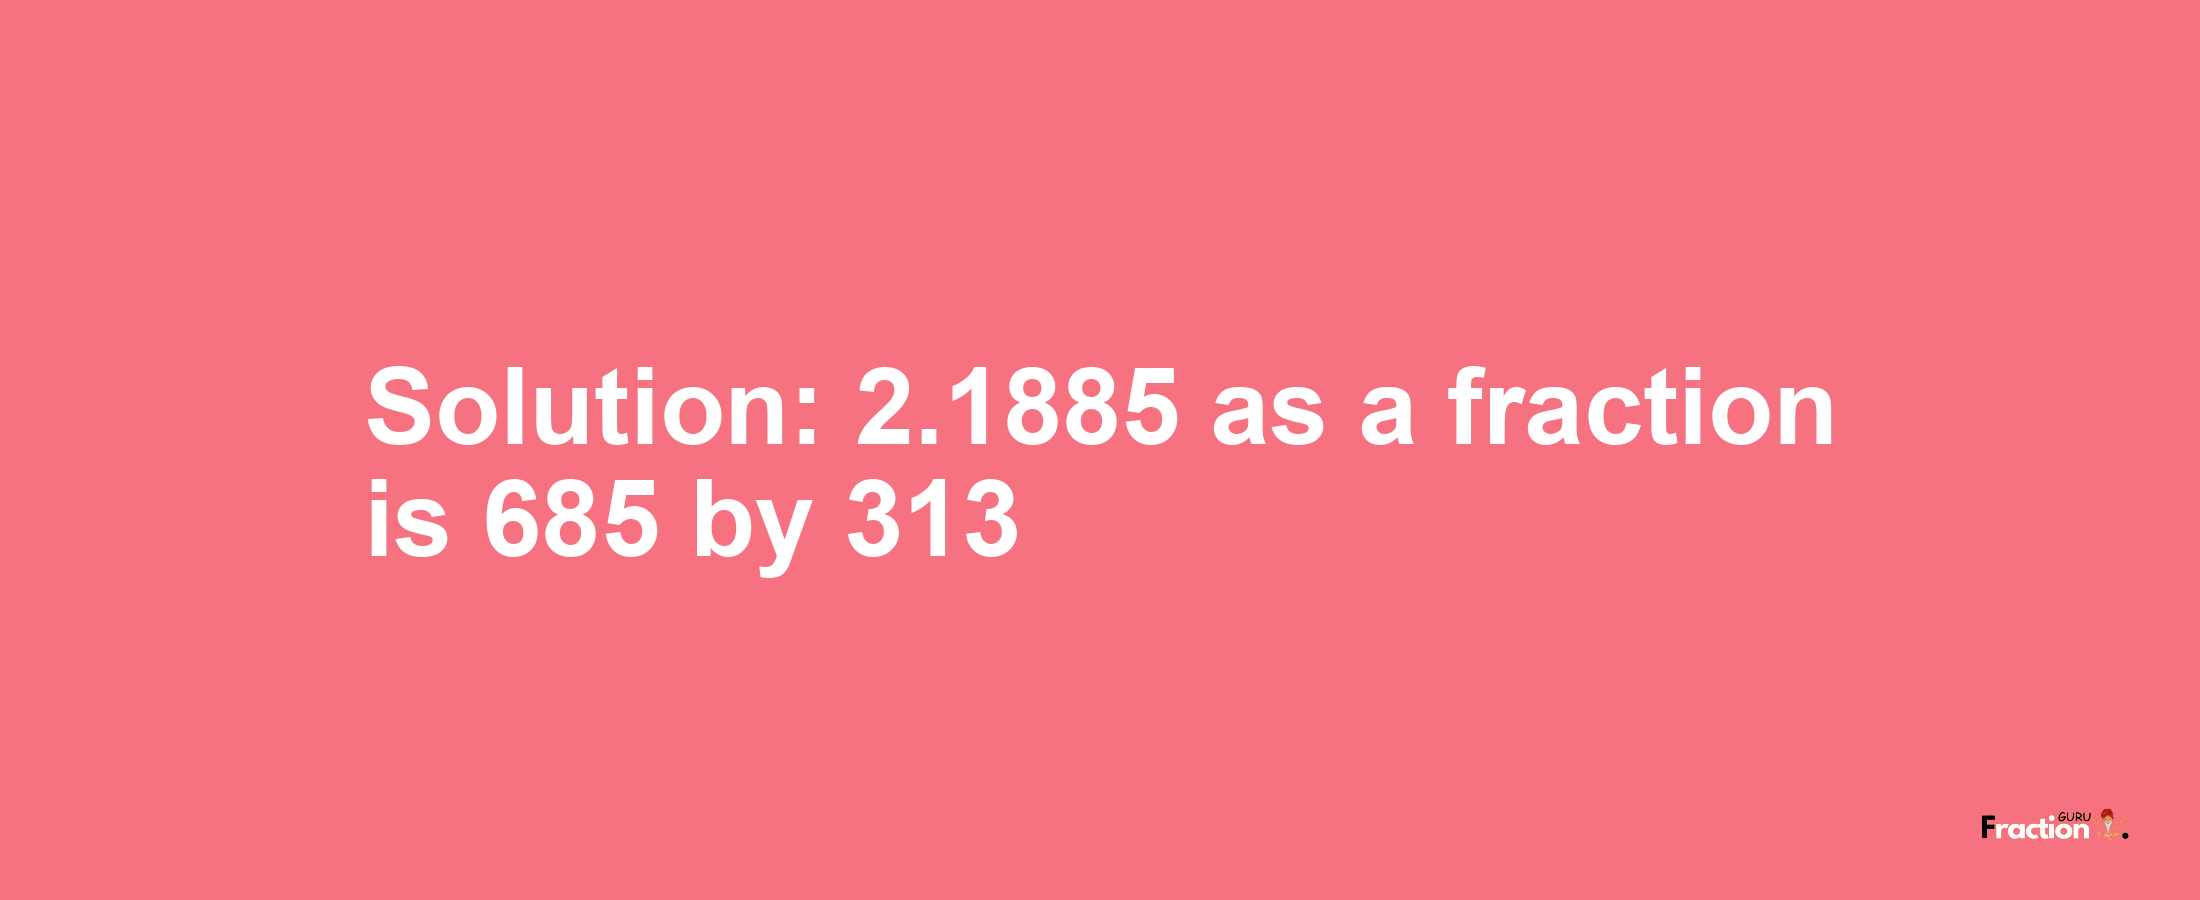 Solution:2.1885 as a fraction is 685/313